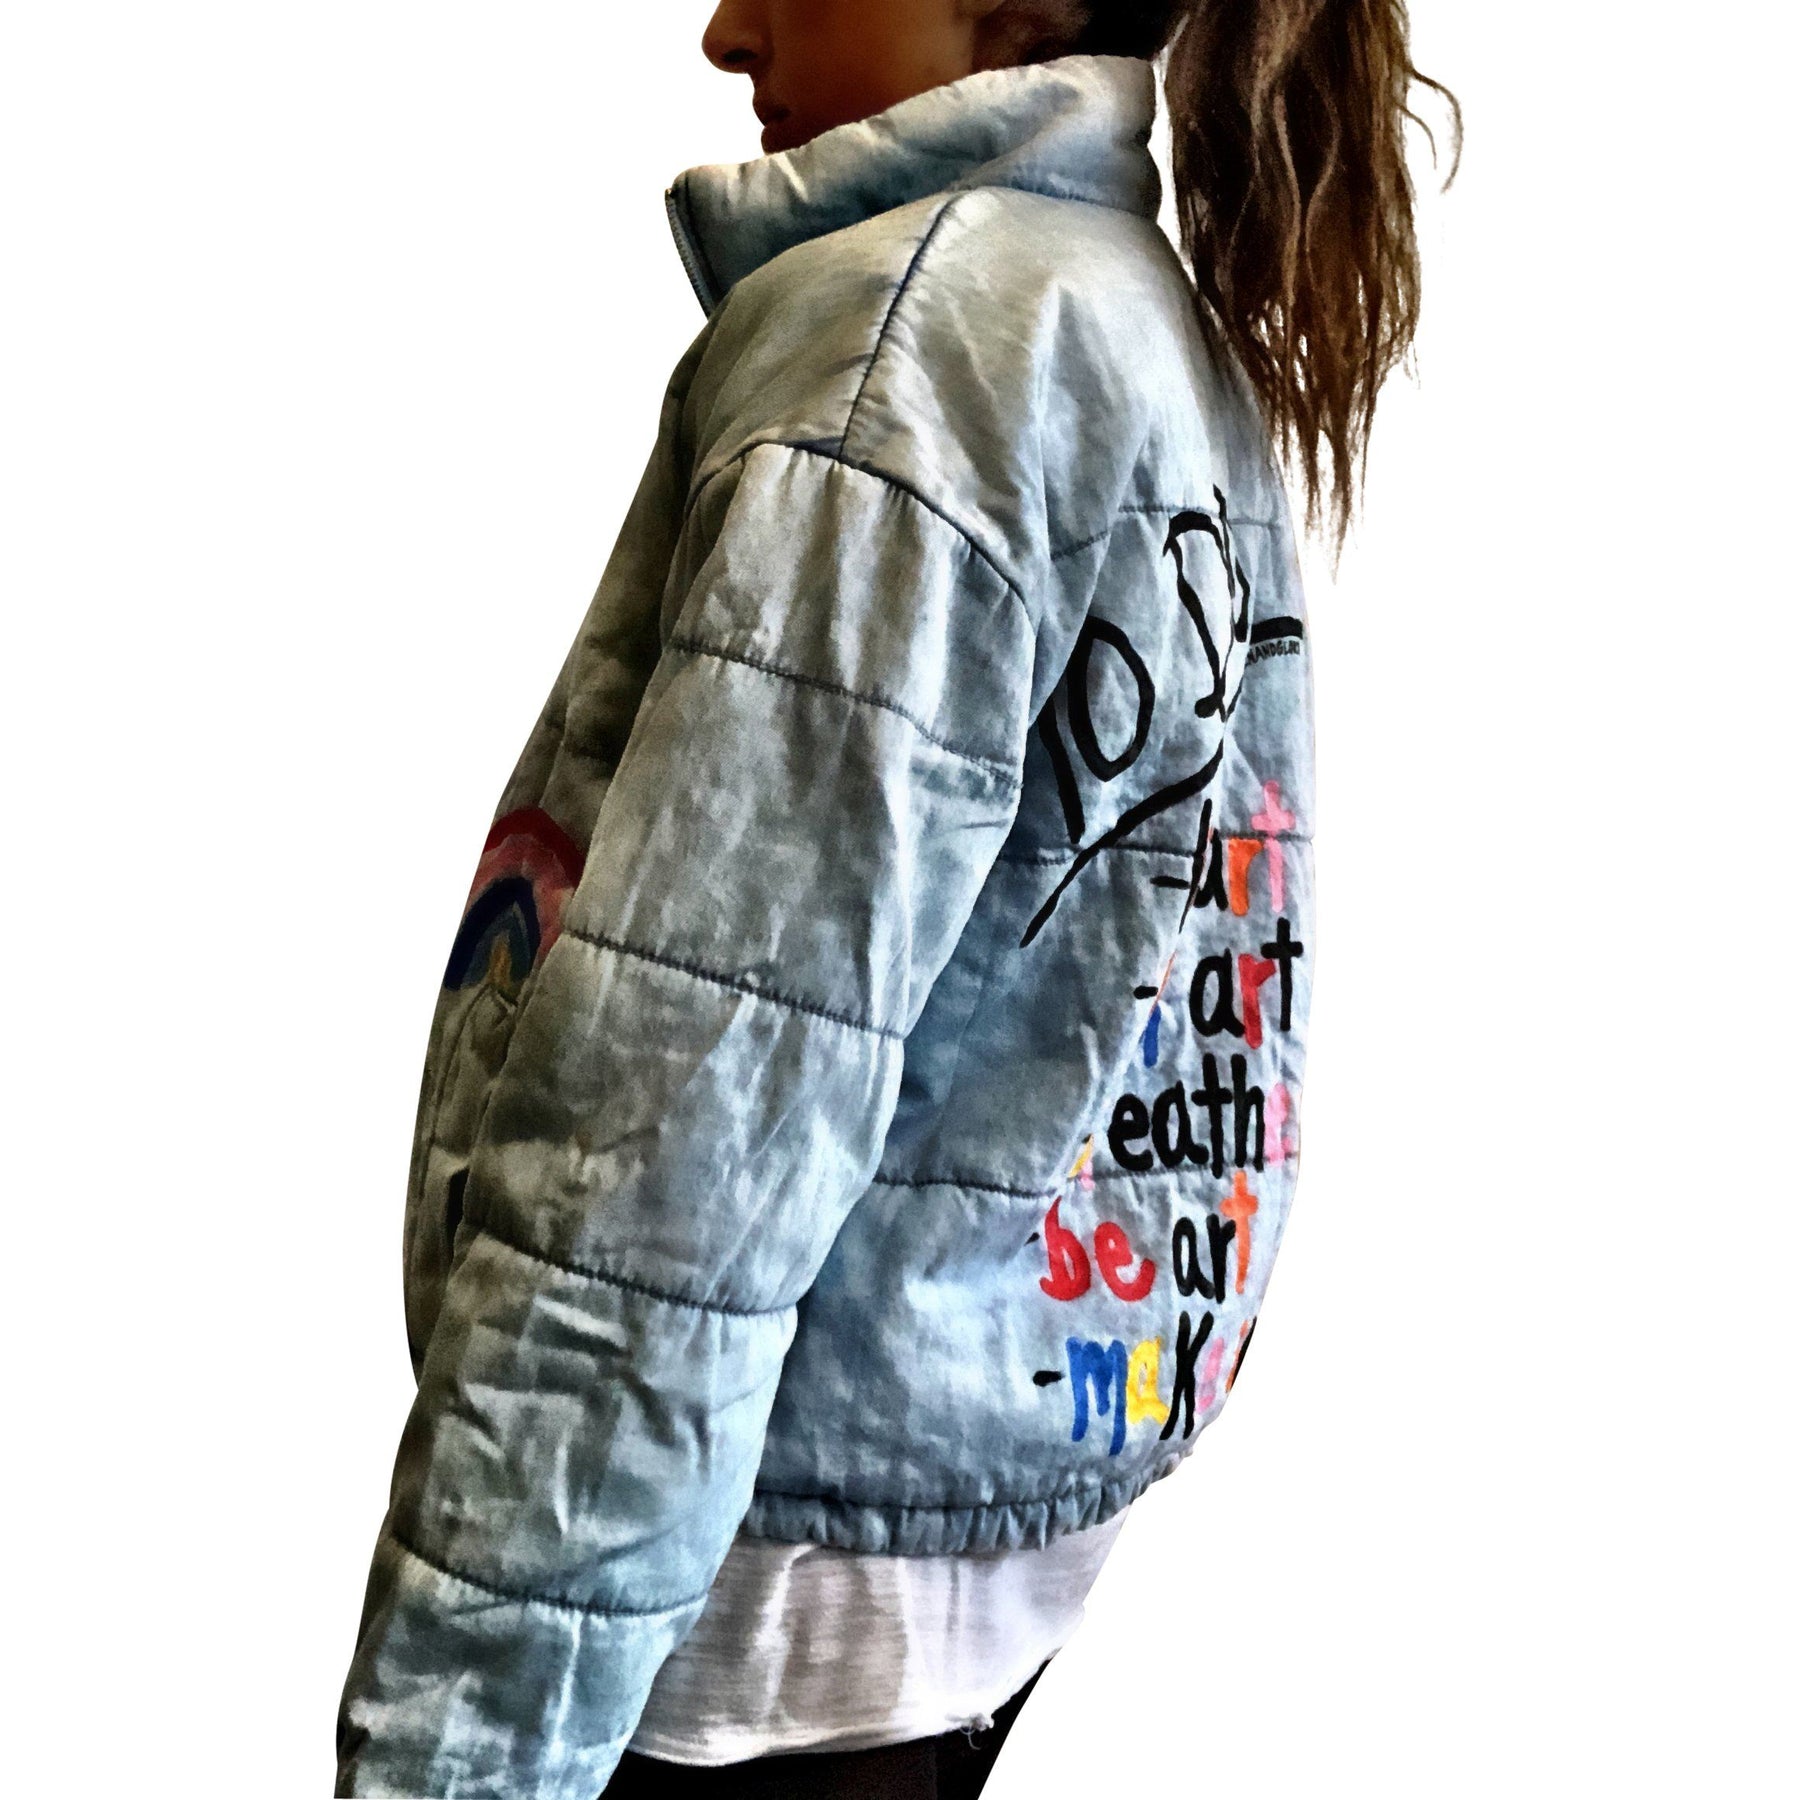 Perfect denim puffer jacket. Painted on back in black and assorted colors - TO DO: Love Art, Feel Art, Breathe Art, Be Art, Make Art Small rainbow painted on front. Signed @wrenandglory.